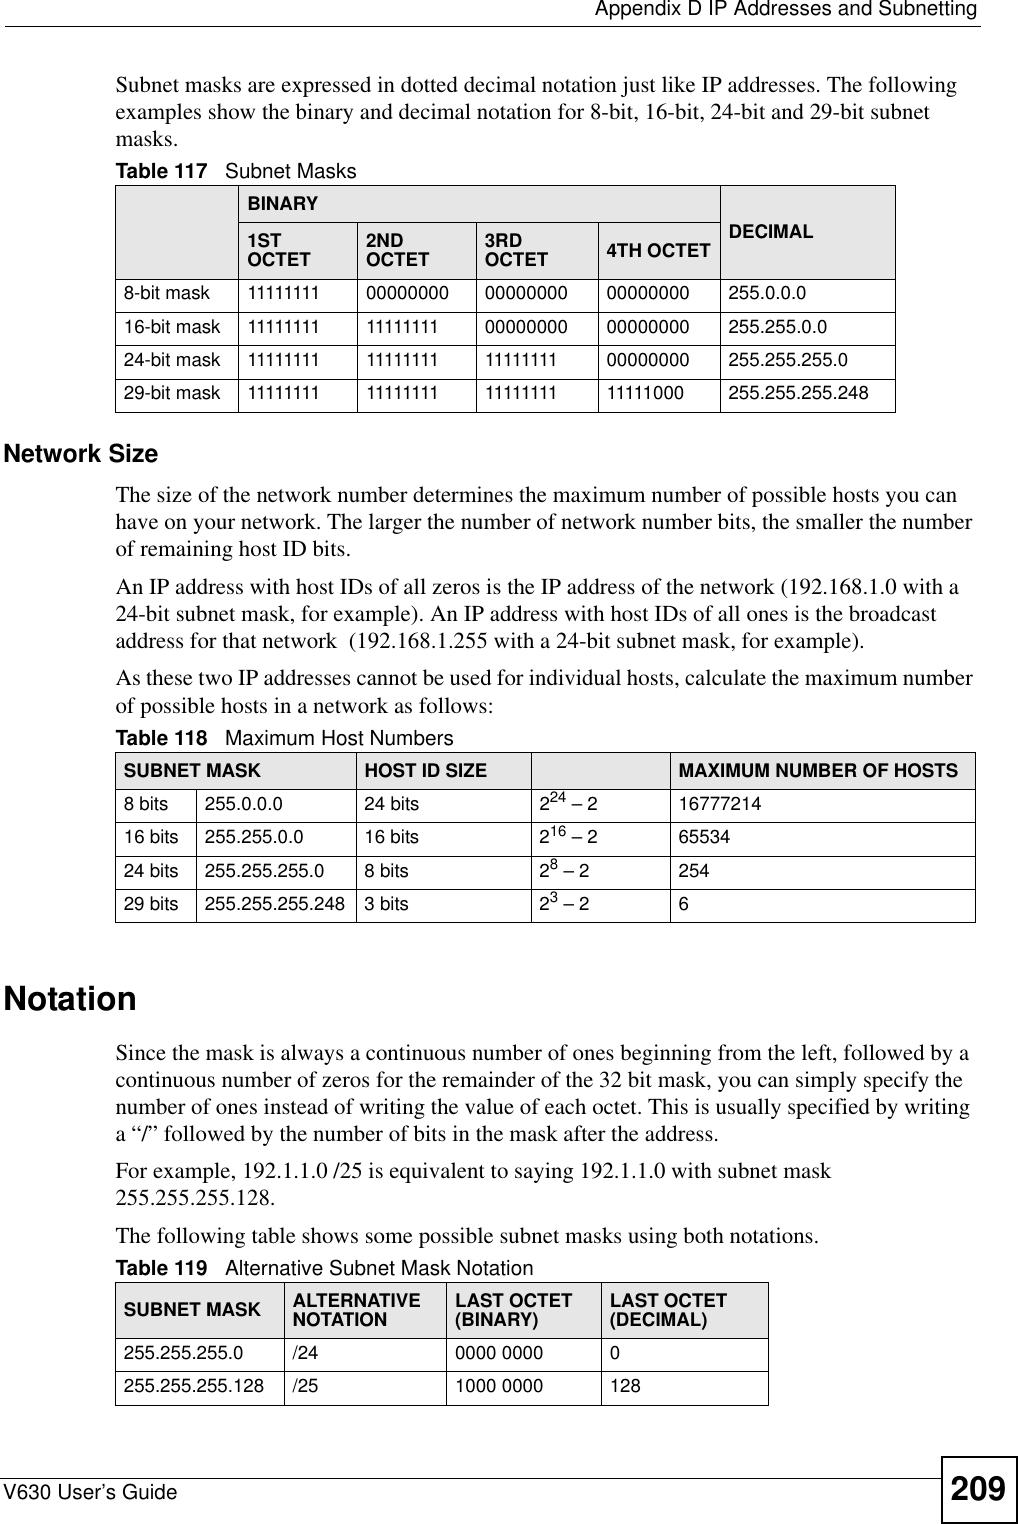  Appendix D IP Addresses and SubnettingV630 User’s Guide 209Subnet masks are expressed in dotted decimal notation just like IP addresses. The following examples show the binary and decimal notation for 8-bit, 16-bit, 24-bit and 29-bit subnet masks. Network SizeThe size of the network number determines the maximum number of possible hosts you can have on your network. The larger the number of network number bits, the smaller the number of remaining host ID bits. An IP address with host IDs of all zeros is the IP address of the network (192.168.1.0 with a 24-bit subnet mask, for example). An IP address with host IDs of all ones is the broadcast address for that network  (192.168.1.255 with a 24-bit subnet mask, for example).As these two IP addresses cannot be used for individual hosts, calculate the maximum number of possible hosts in a network as follows:NotationSince the mask is always a continuous number of ones beginning from the left, followed by a continuous number of zeros for the remainder of the 32 bit mask, you can simply specify the number of ones instead of writing the value of each octet. This is usually specified by writing a “/” followed by the number of bits in the mask after the address. For example, 192.1.1.0 /25 is equivalent to saying 192.1.1.0 with subnet mask 255.255.255.128. The following table shows some possible subnet masks using both notations. Table 117   Subnet MasksBINARYDECIMAL1ST OCTET 2ND OCTET 3RD OCTET 4TH OCTET8-bit mask 11111111 00000000 00000000 00000000 255.0.0.016-bit mask 11111111 11111111 00000000 00000000 255.255.0.024-bit mask 11111111 11111111 11111111 00000000 255.255.255.029-bit mask 11111111 11111111 11111111 11111000 255.255.255.248Table 118   Maximum Host NumbersSUBNET MASK HOST ID SIZE MAXIMUM NUMBER OF HOSTS8 bits 255.0.0.0 24 bits 224 – 2 1677721416 bits 255.255.0.0 16 bits 216 – 2 6553424 bits 255.255.255.0 8 bits 28 – 2 25429 bits 255.255.255.248 3 bits 23 – 2 6Table 119   Alternative Subnet Mask NotationSUBNET MASK ALTERNATIVE NOTATION LAST OCTET (BINARY) LAST OCTET (DECIMAL)255.255.255.0 /24 0000 0000 0255.255.255.128 /25 1000 0000 128